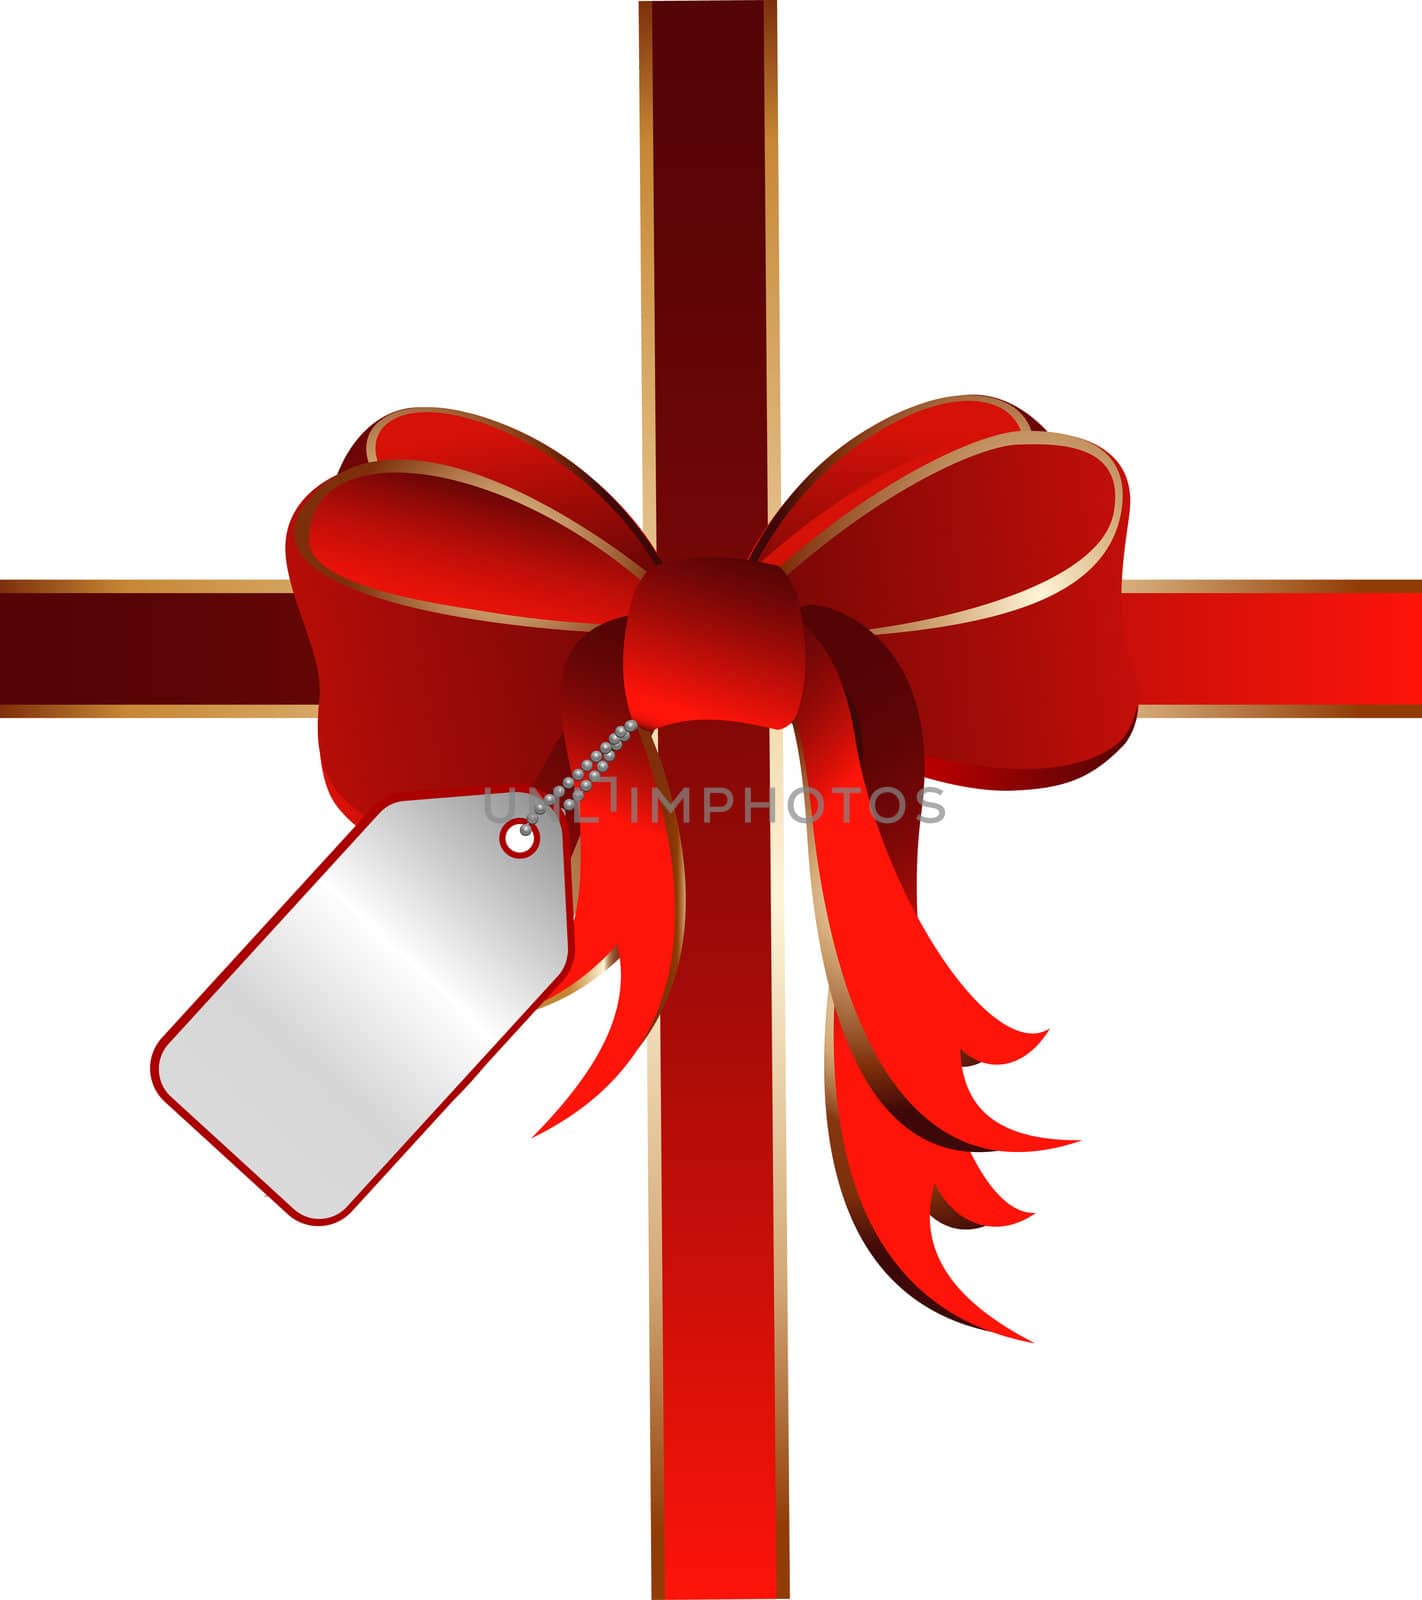 illustration of a red ribbon with card tag